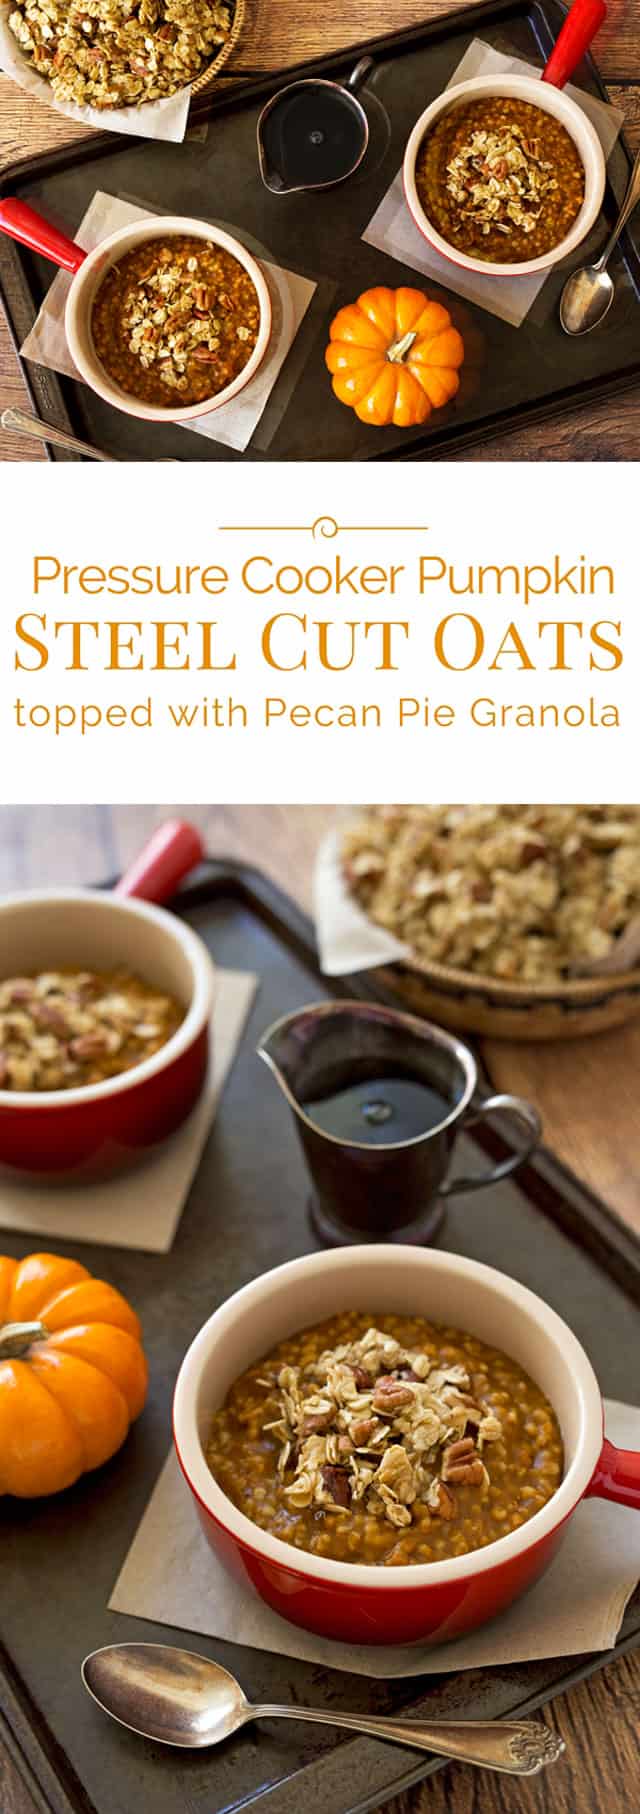 Pumpkin-Steel-Cut-Oats-Collage-Pressure-Cooking-Today